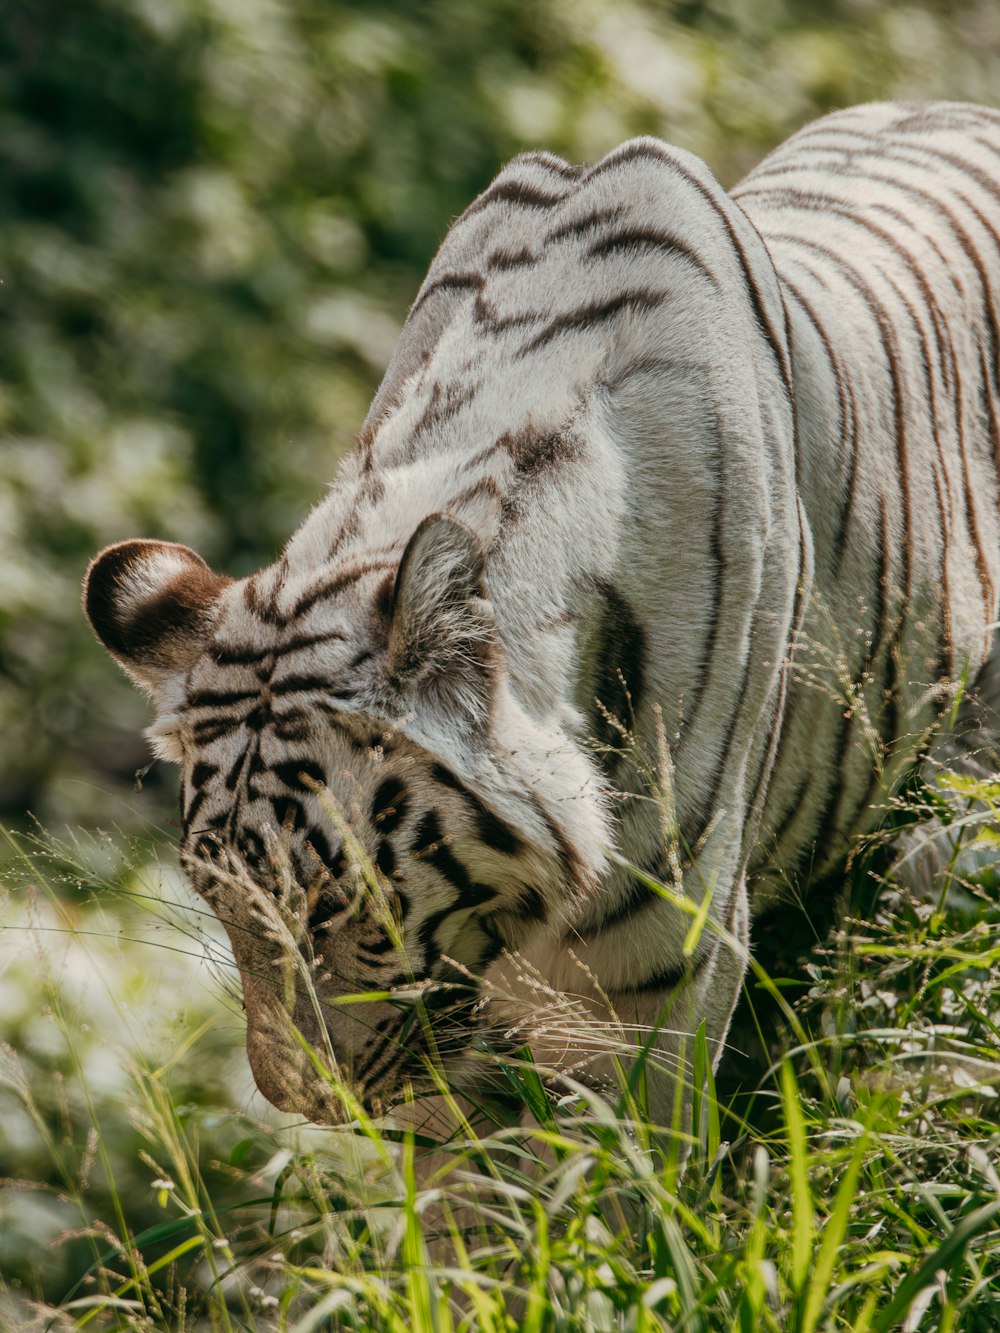 a white tiger eating grass in a field